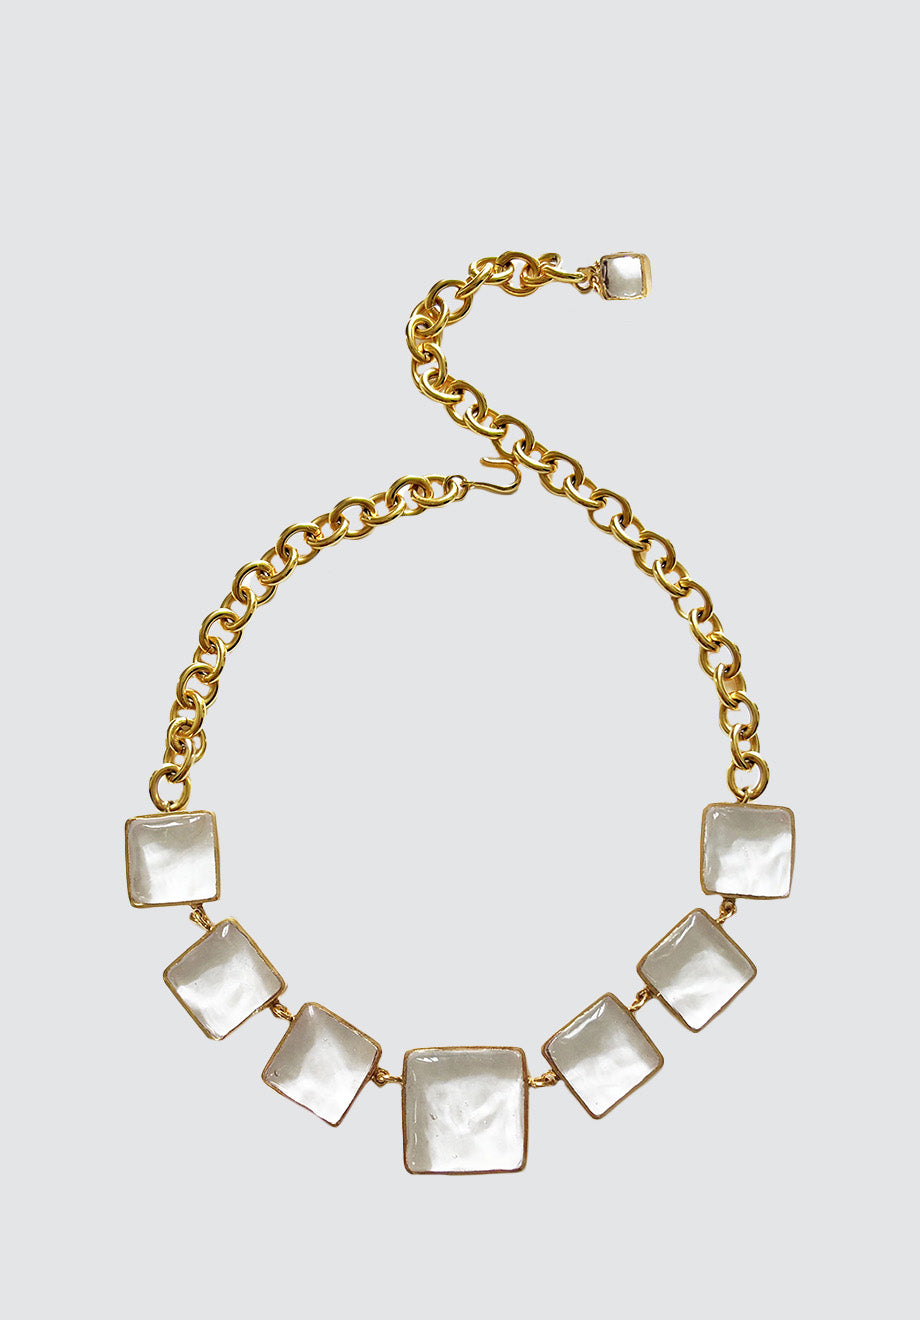 Chain & Crystal Pave Necklace